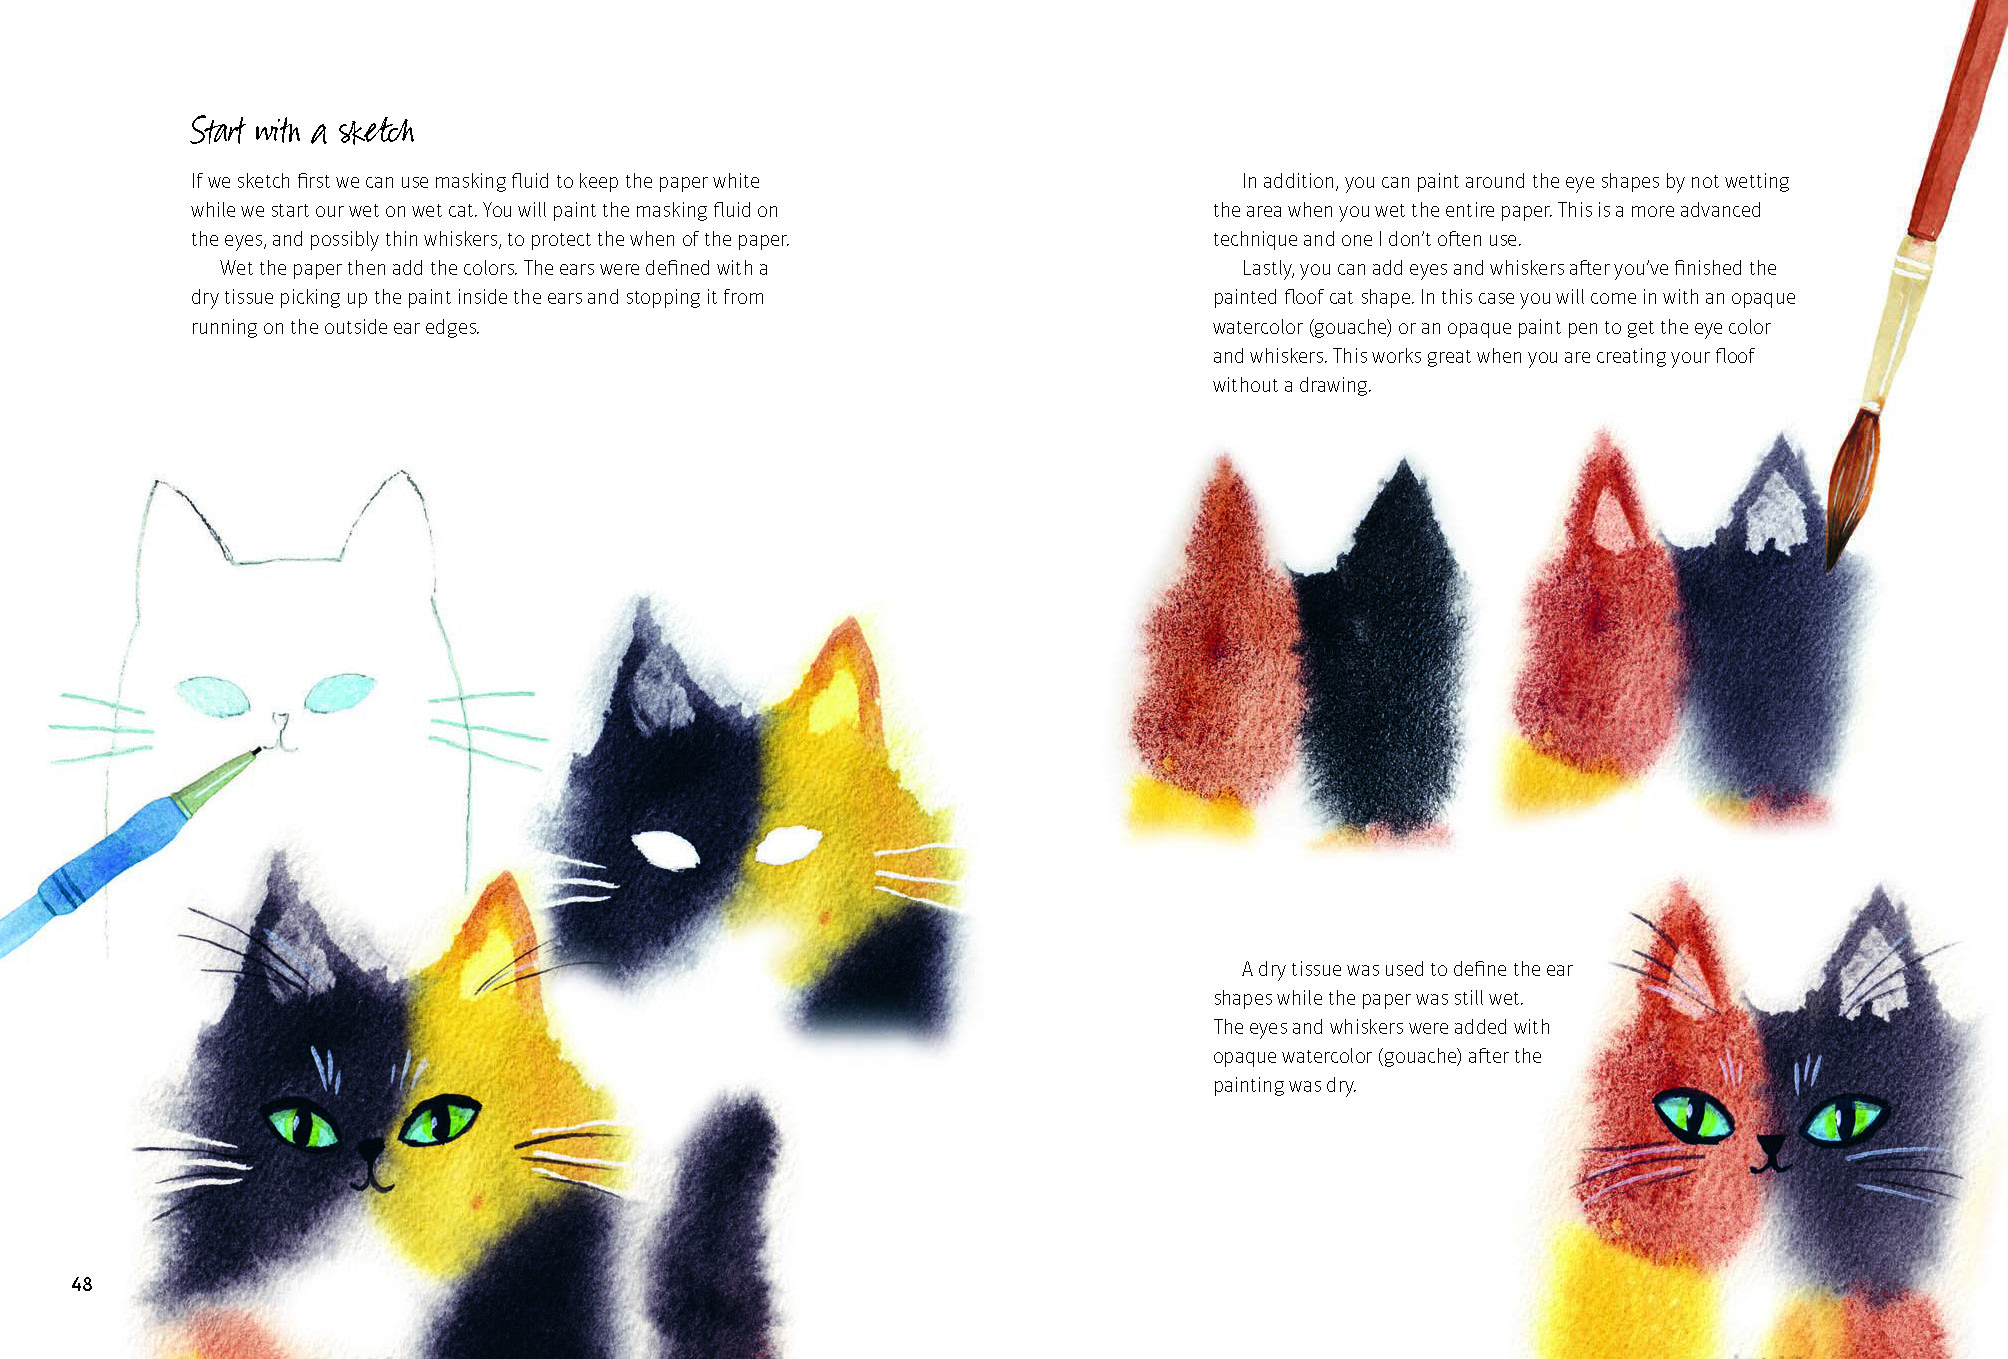 Painting Cats